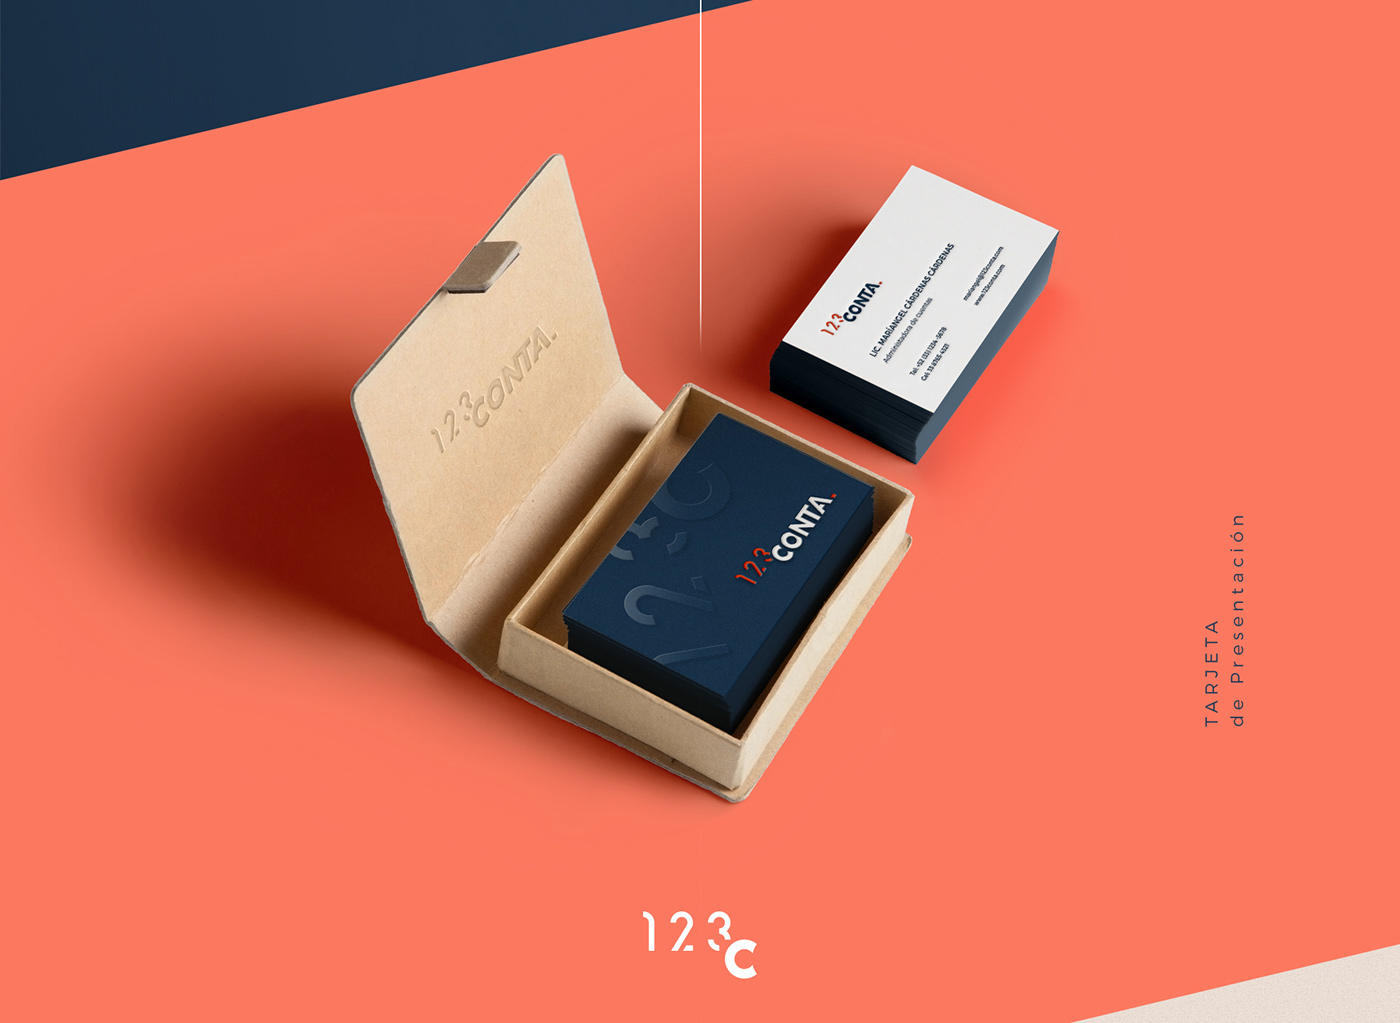 Contabilidad logo Stationery web page blue orange online invoice factura Responsive mobile